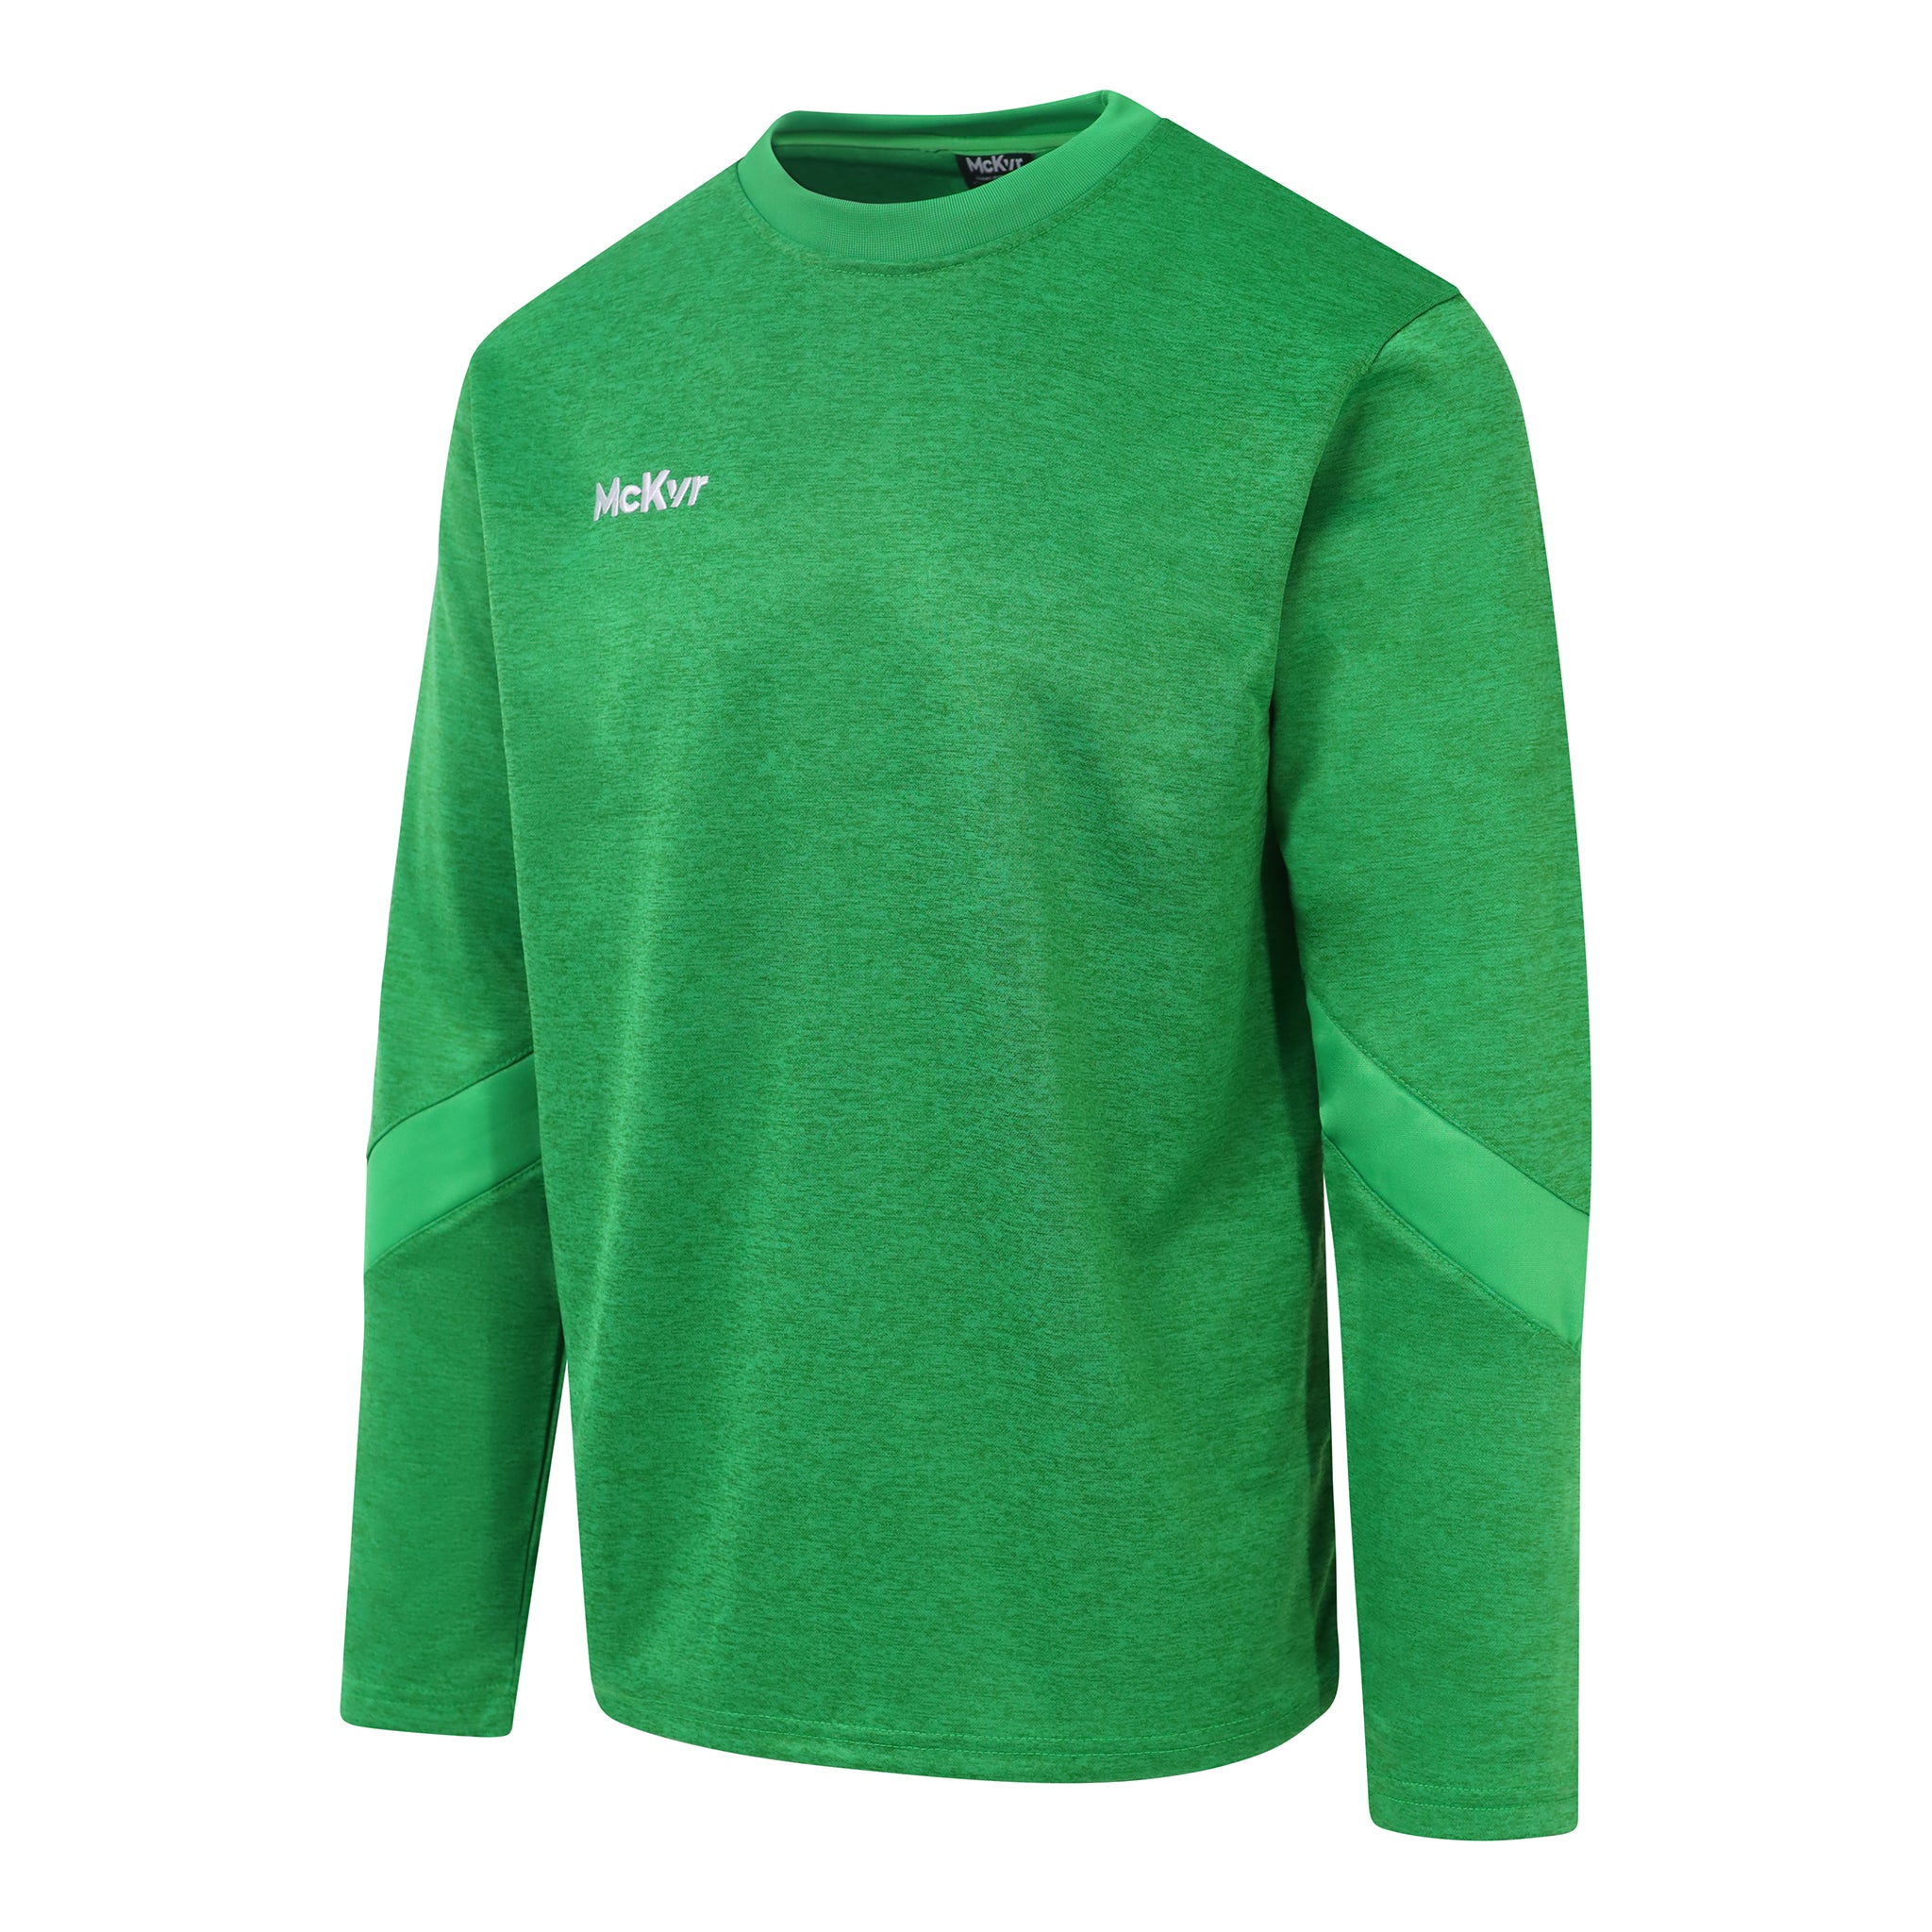 Mc Keever Core 22 Sweat Top - Youth - Green